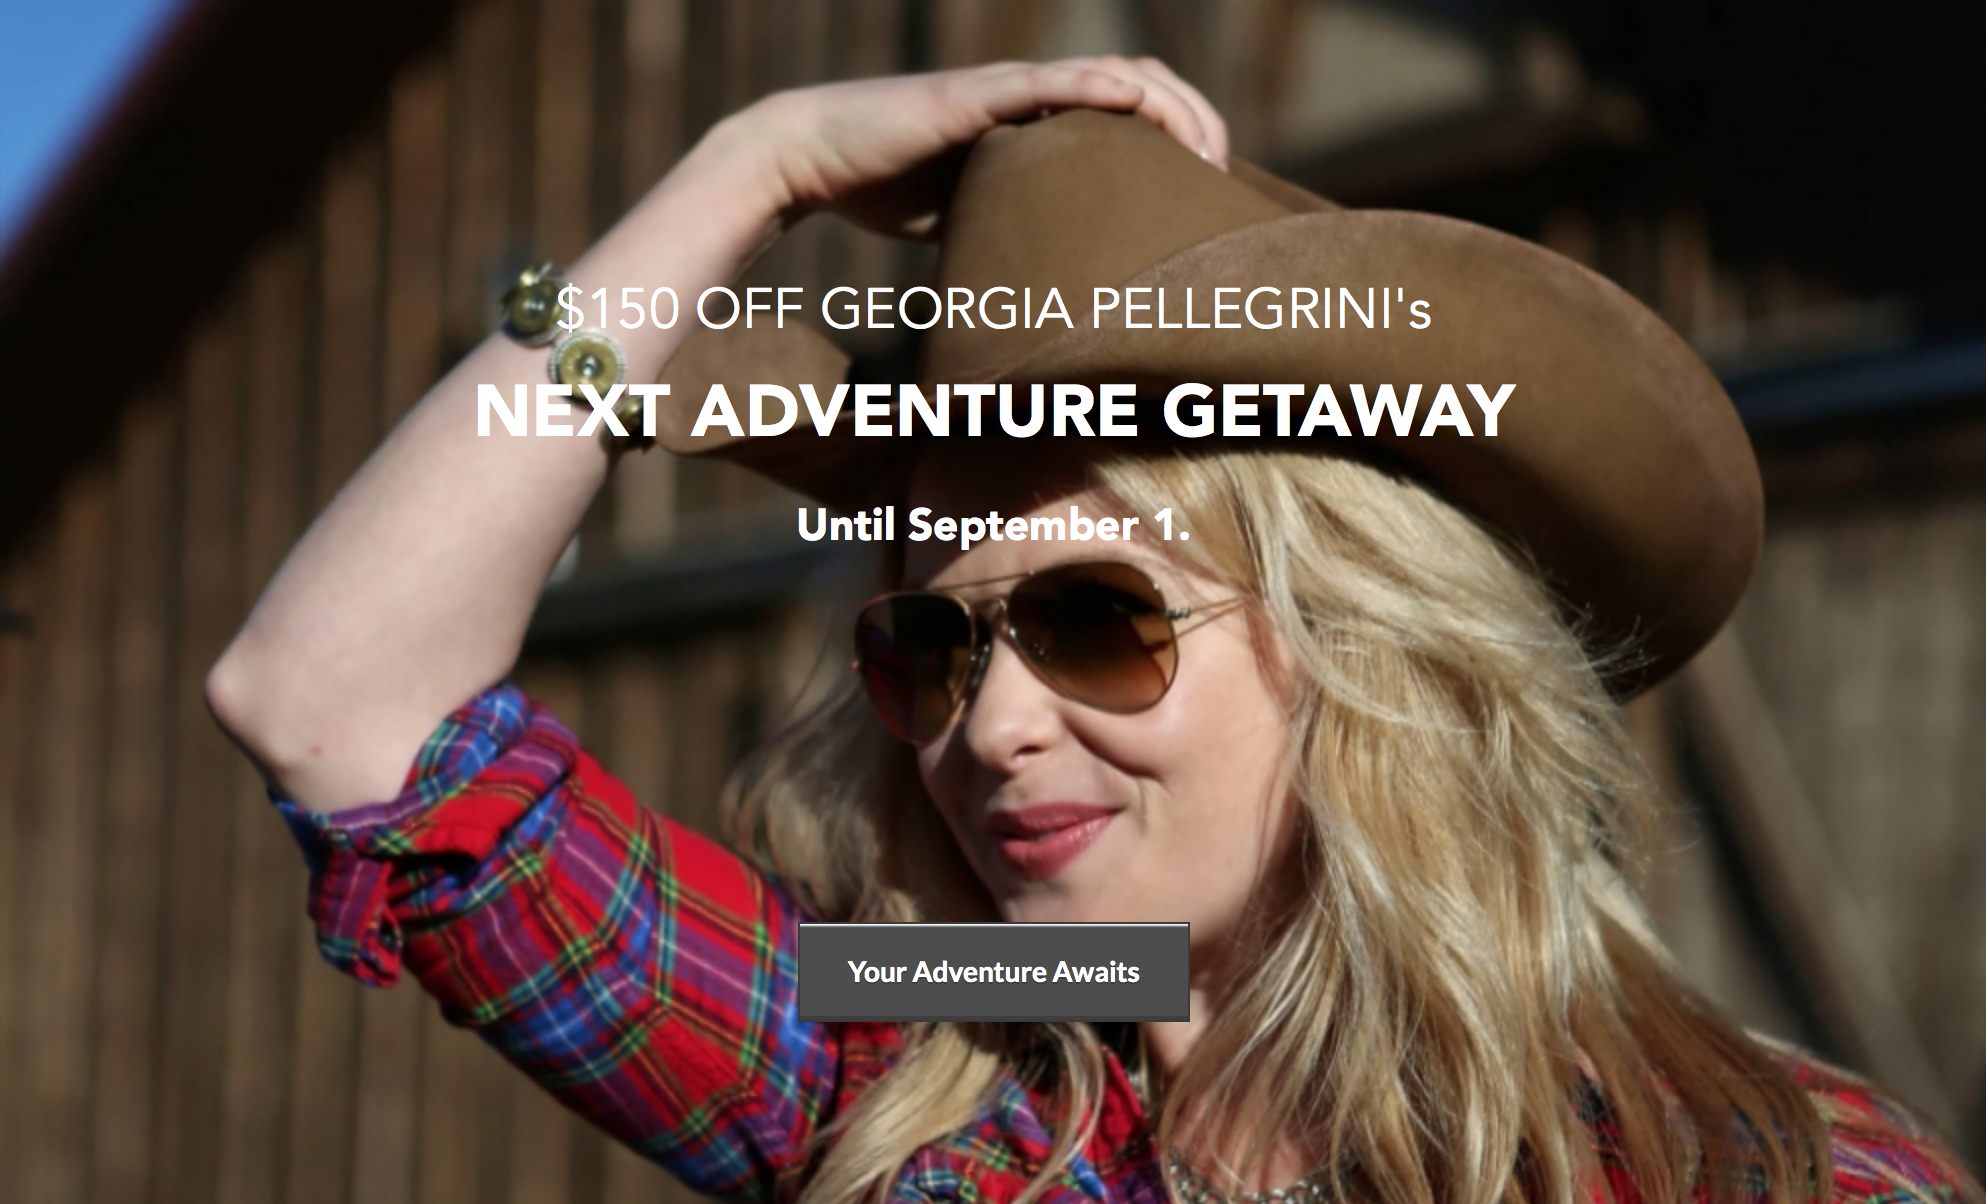 Join Me On An Adventure Getaway in TEXAS!